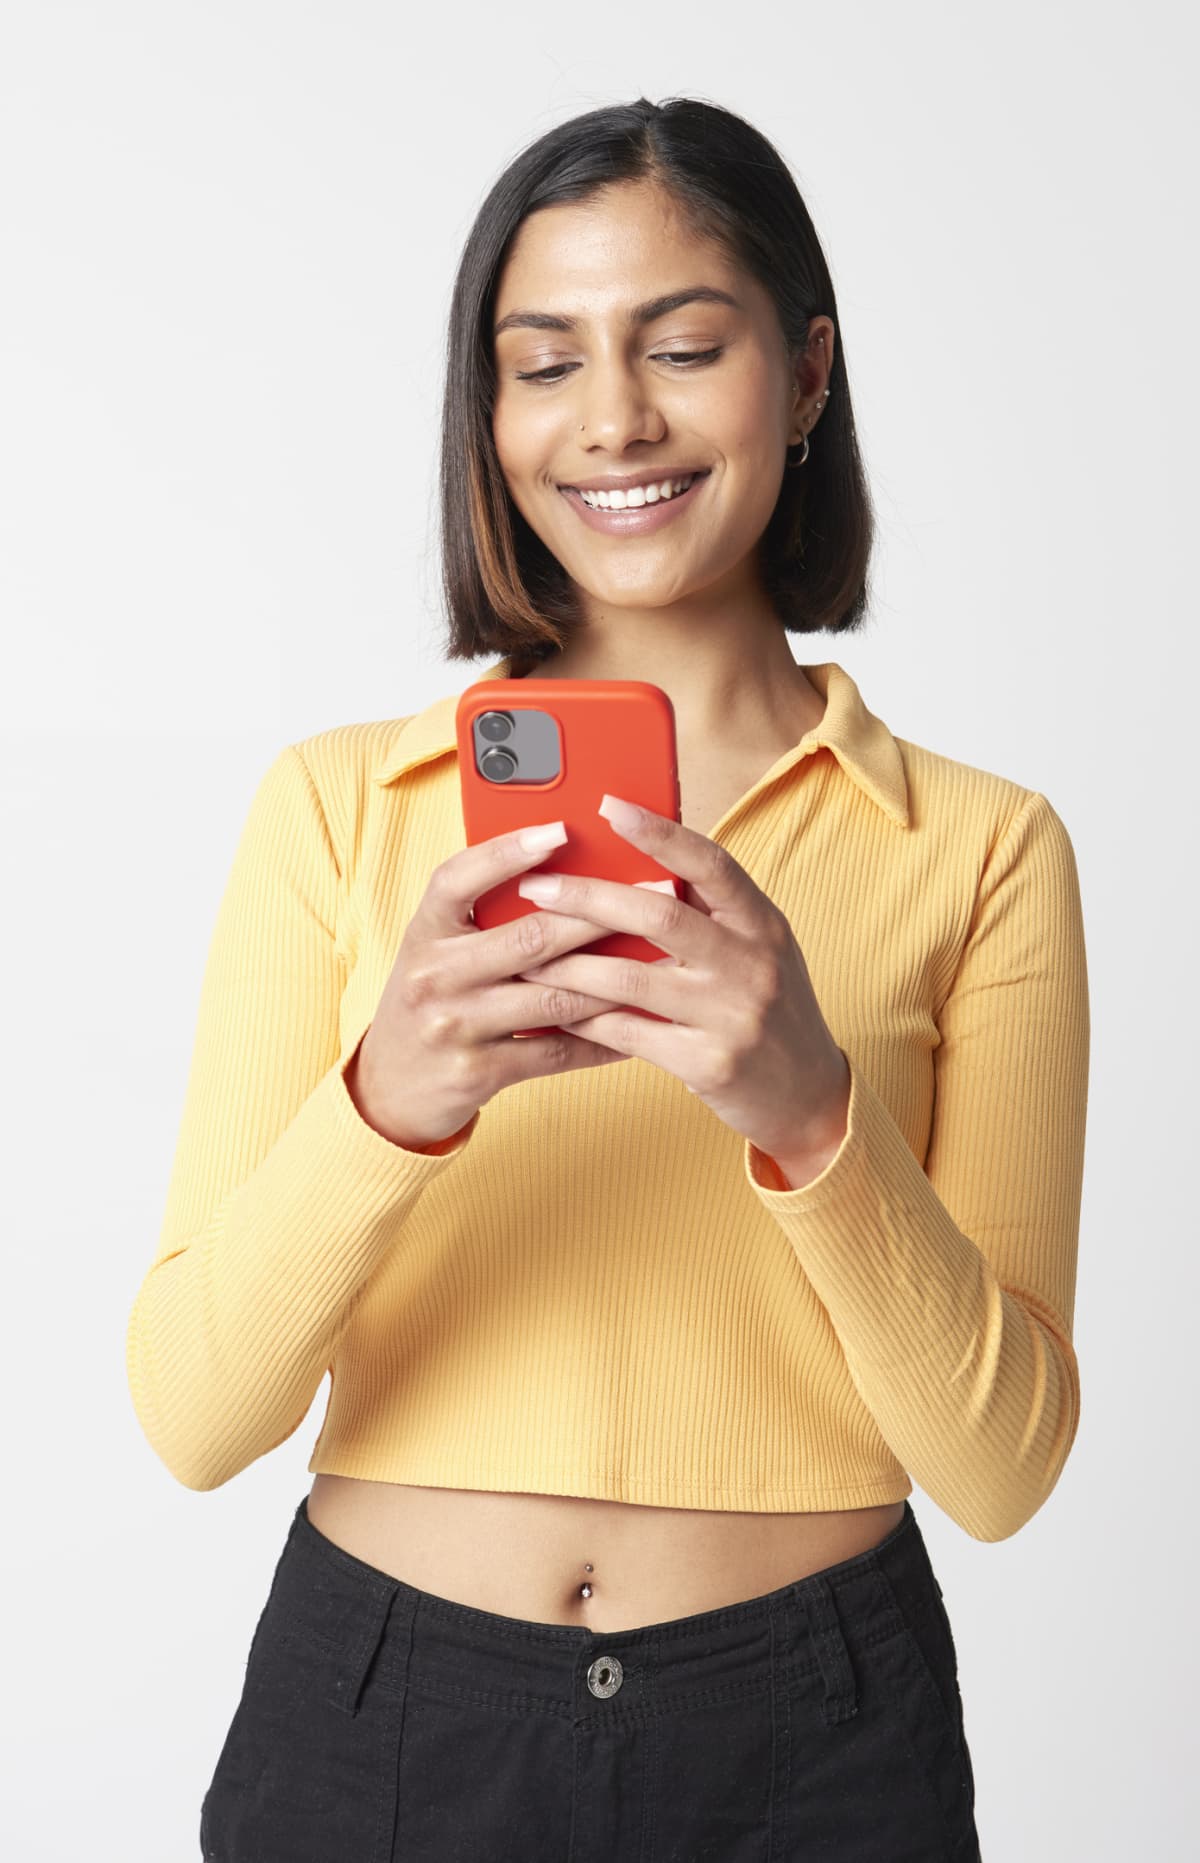 young woman smiling and looking at her smartphone against white background